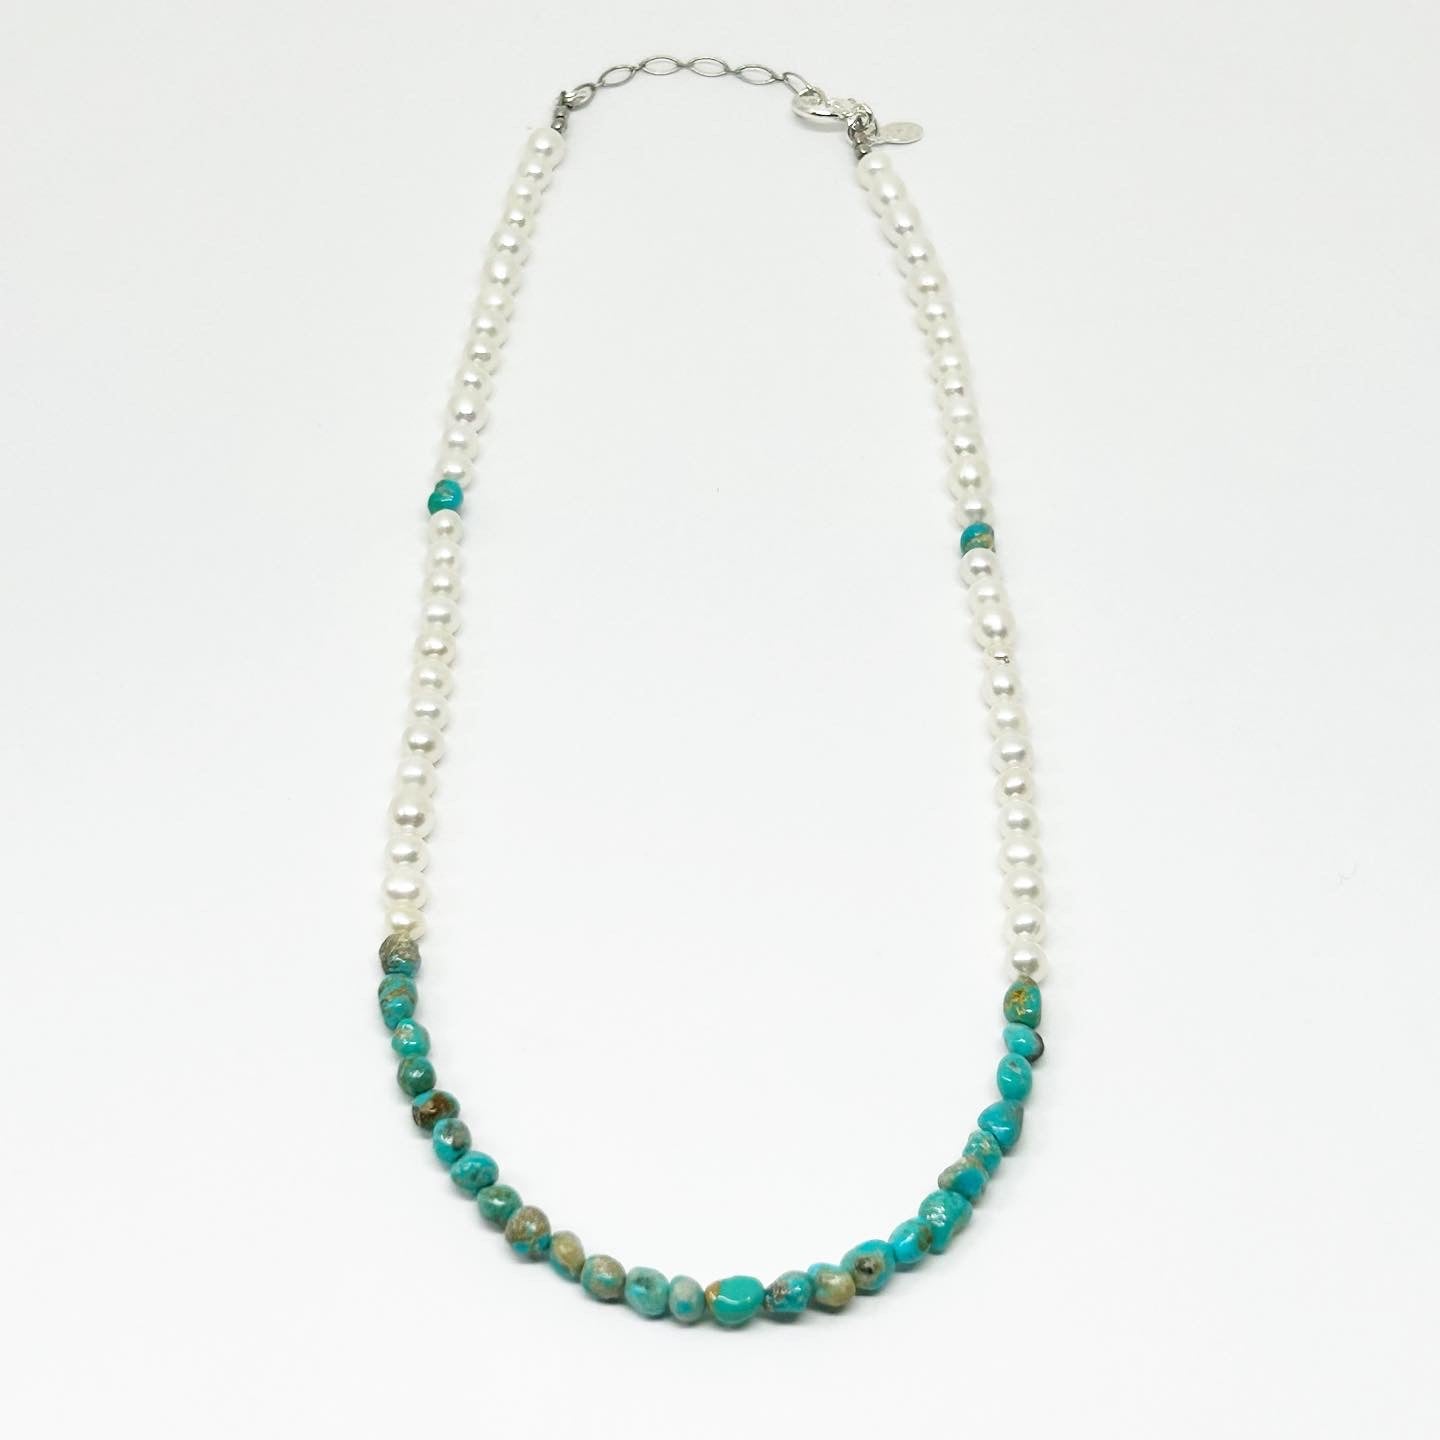 Turquoise and Pearls Necklace #200 - Jennifer Cervelli Jewelry